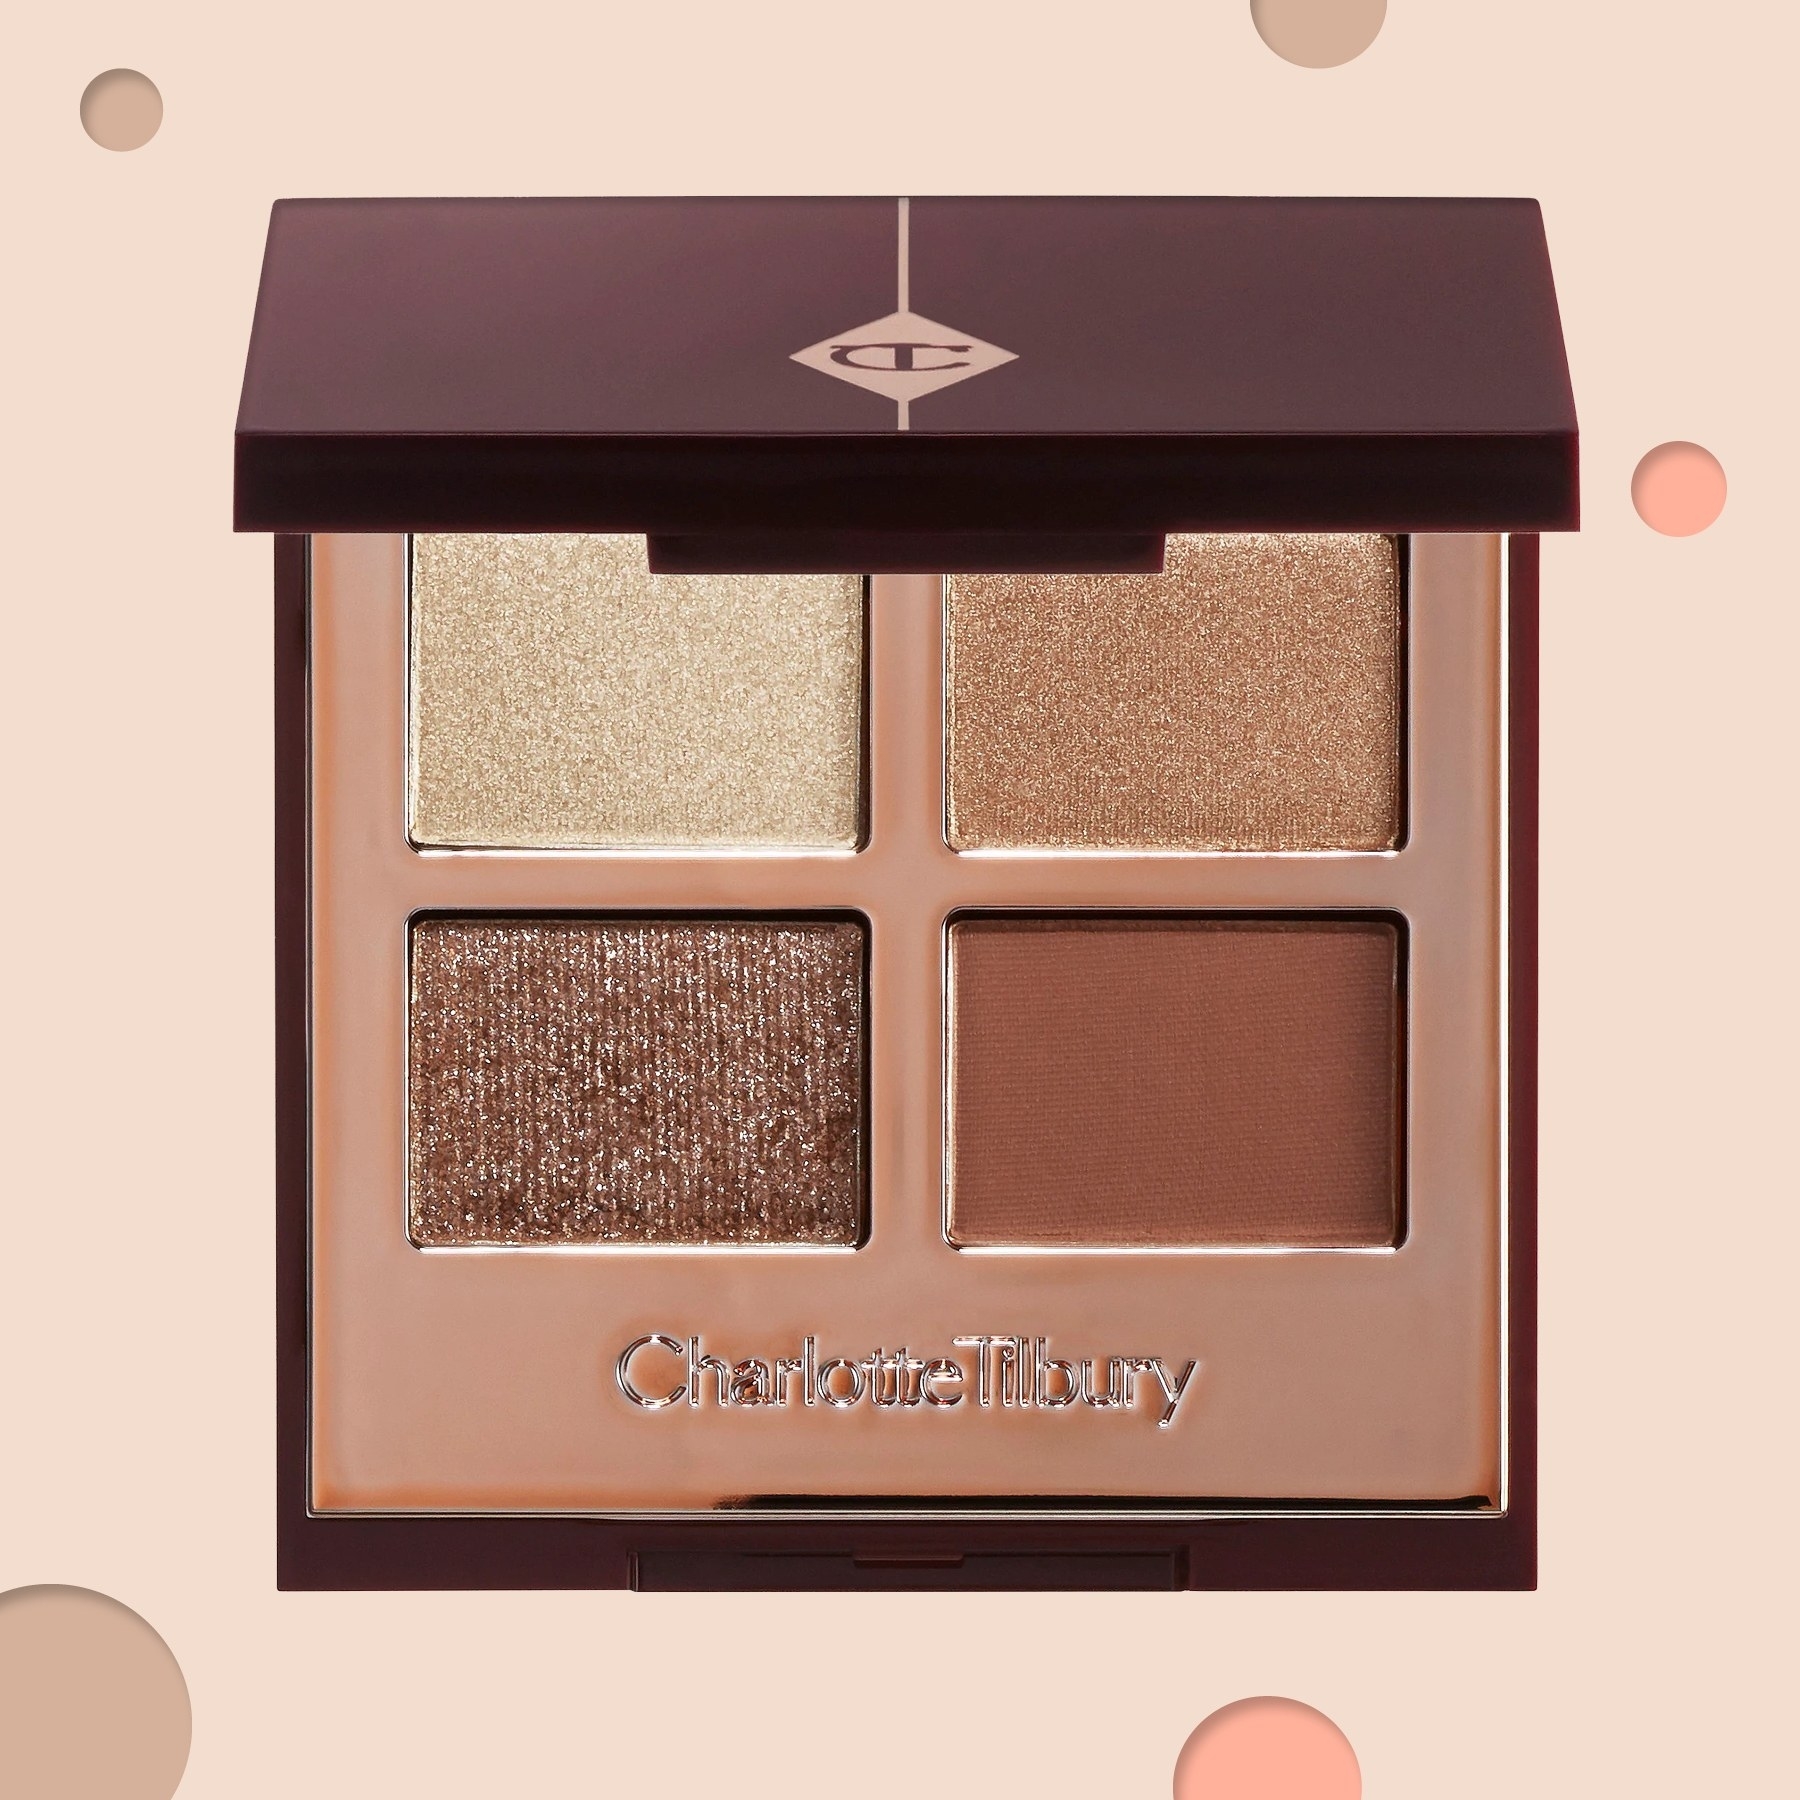 13 Best Nude Eyeshadow Palettes Of 2019 | Glamour intended for Neutral Eyeshadow Palette For Blue Eyes